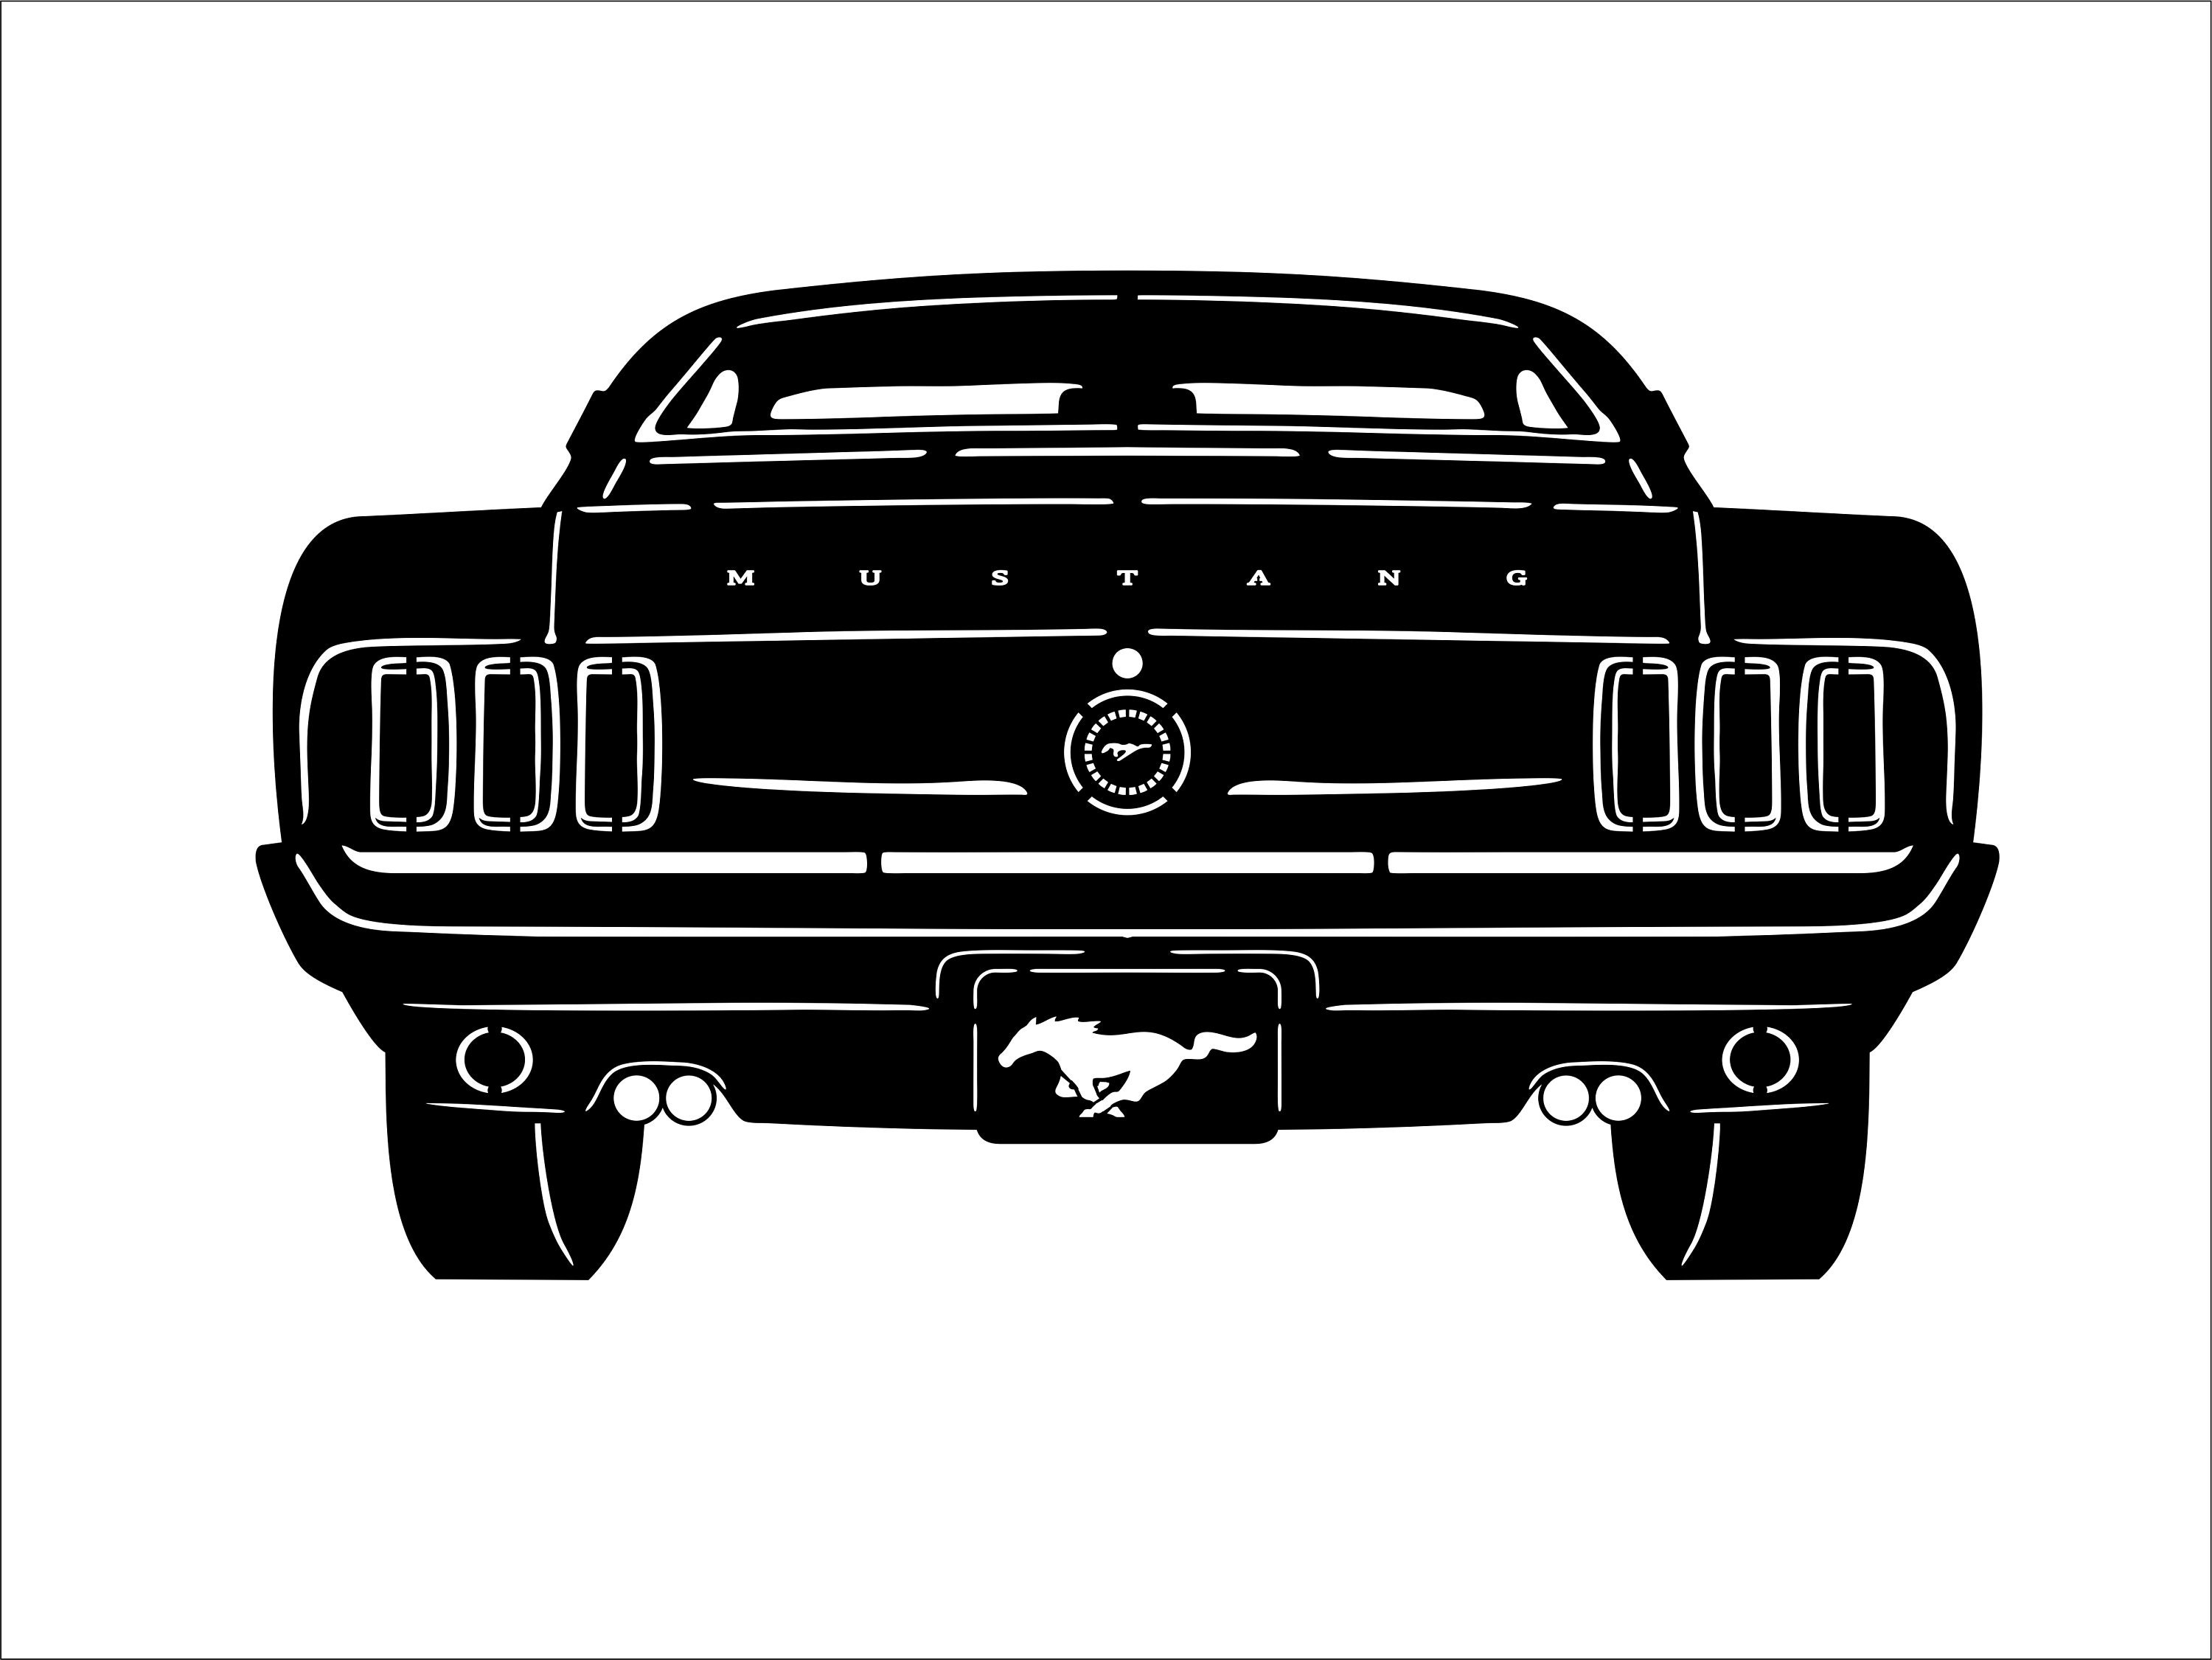 Ford Mustang 1969 Back Silhouette Svg Dxf Eps Pdf Clip - Etsy Ireland